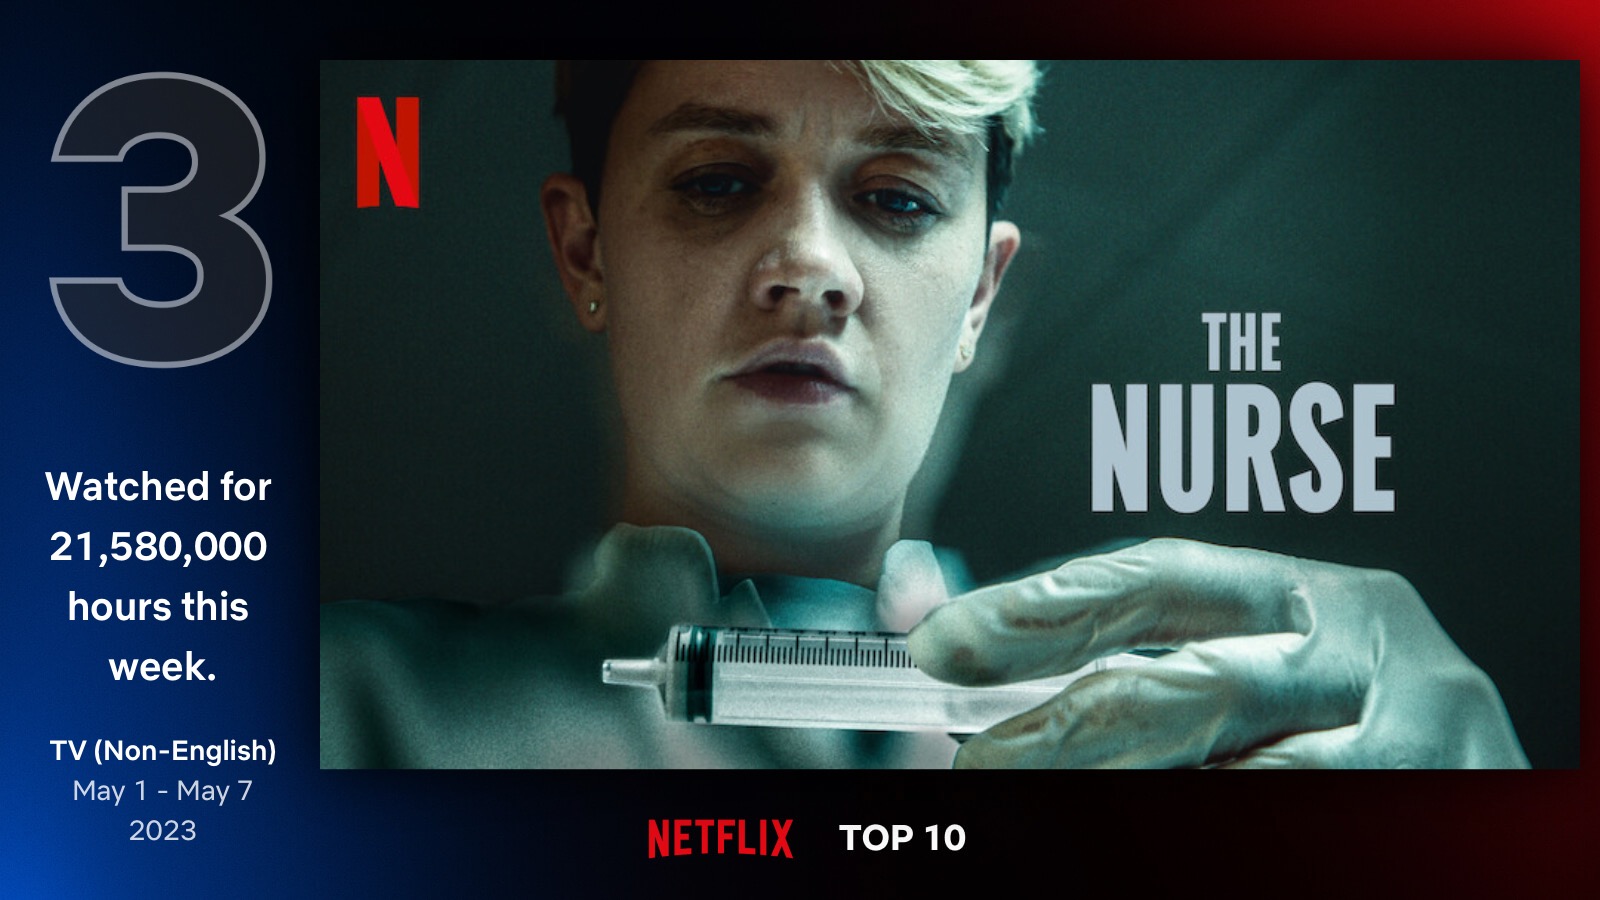 The Nurse spent weeks on Global Most Watched list